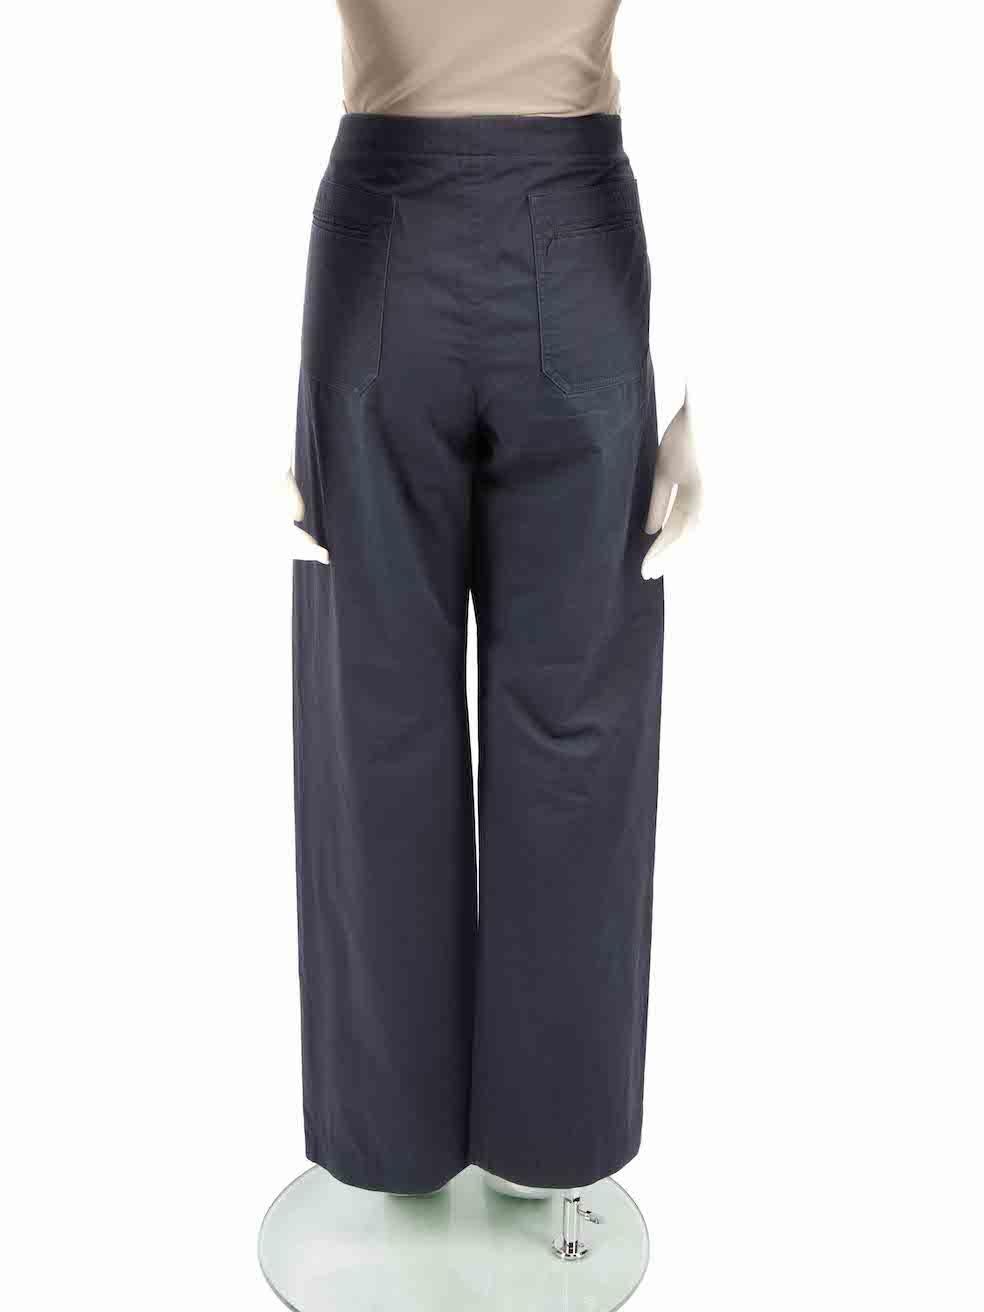 Marni S/S13 Navy Straight Leg Trousers Size L In Good Condition For Sale In London, GB